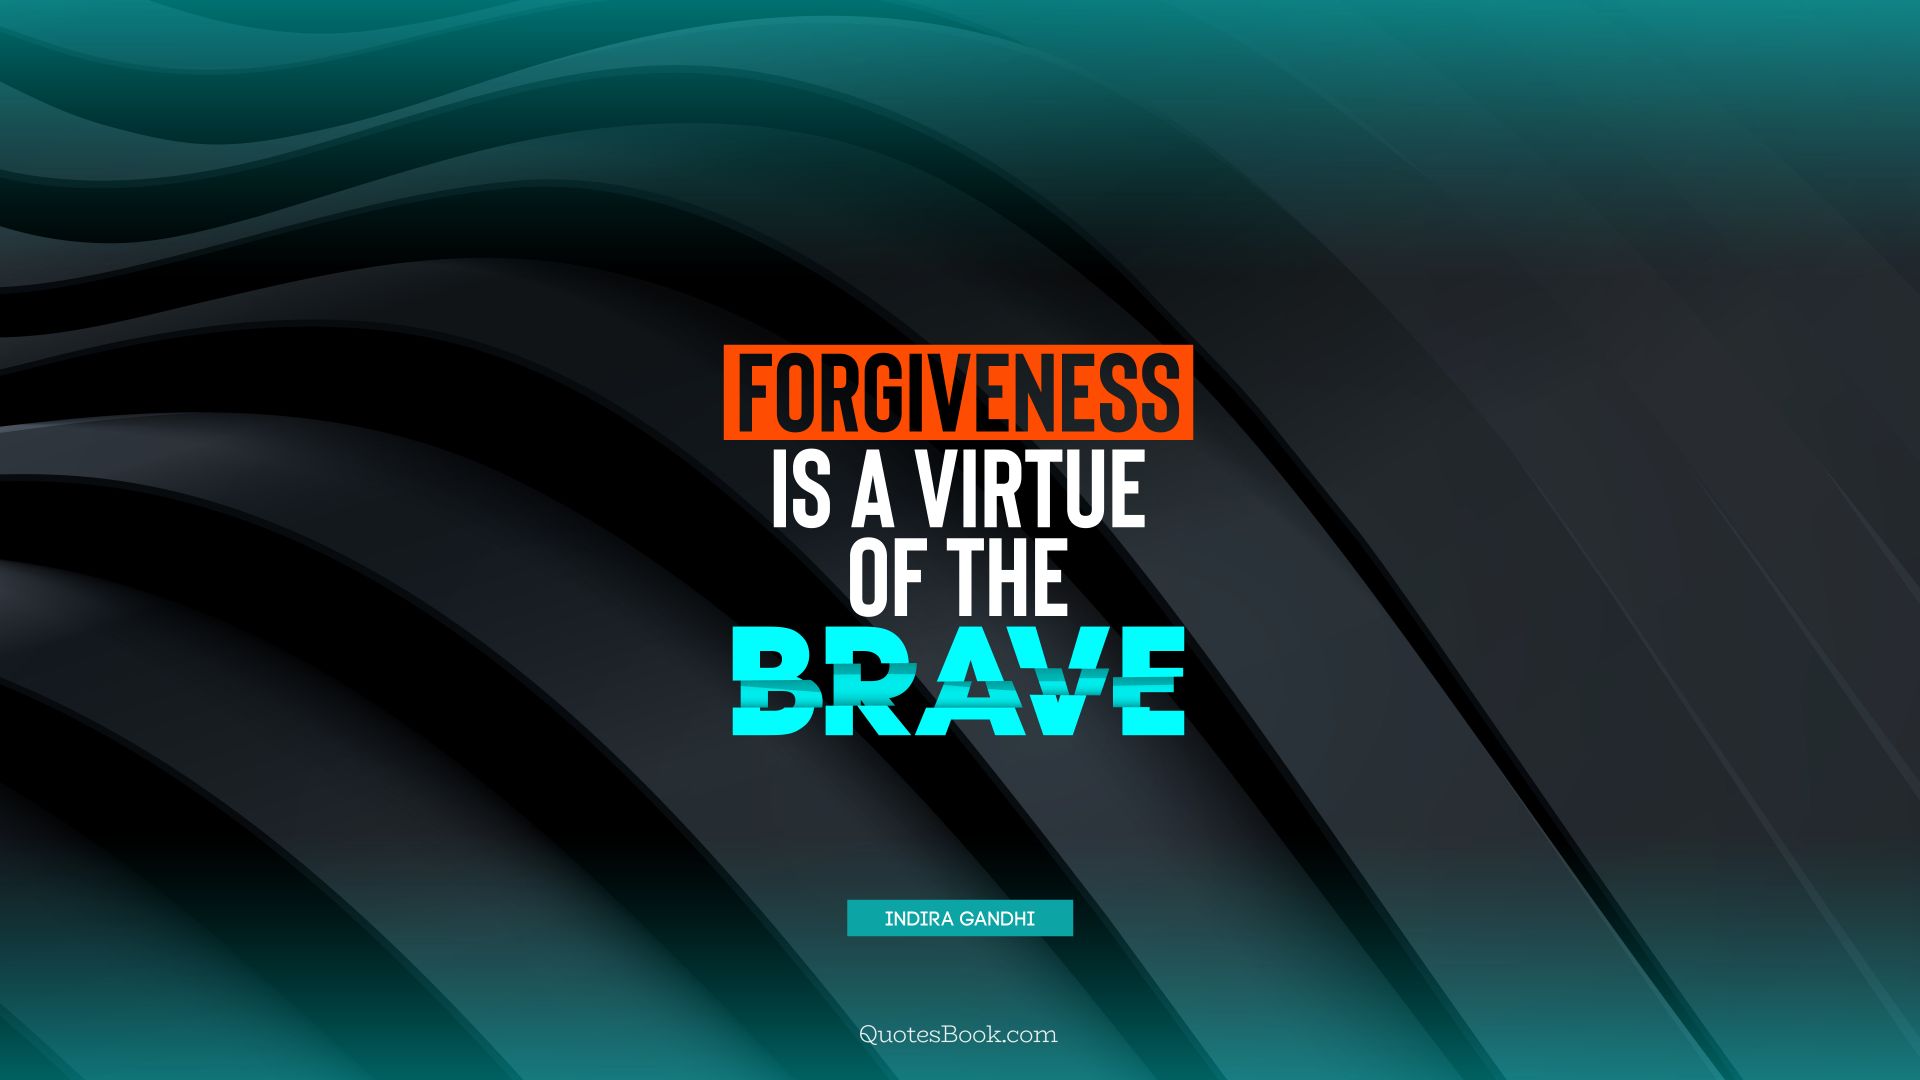 Forgiveness is a virtue of the brave. - Quote by Indira Gandhi